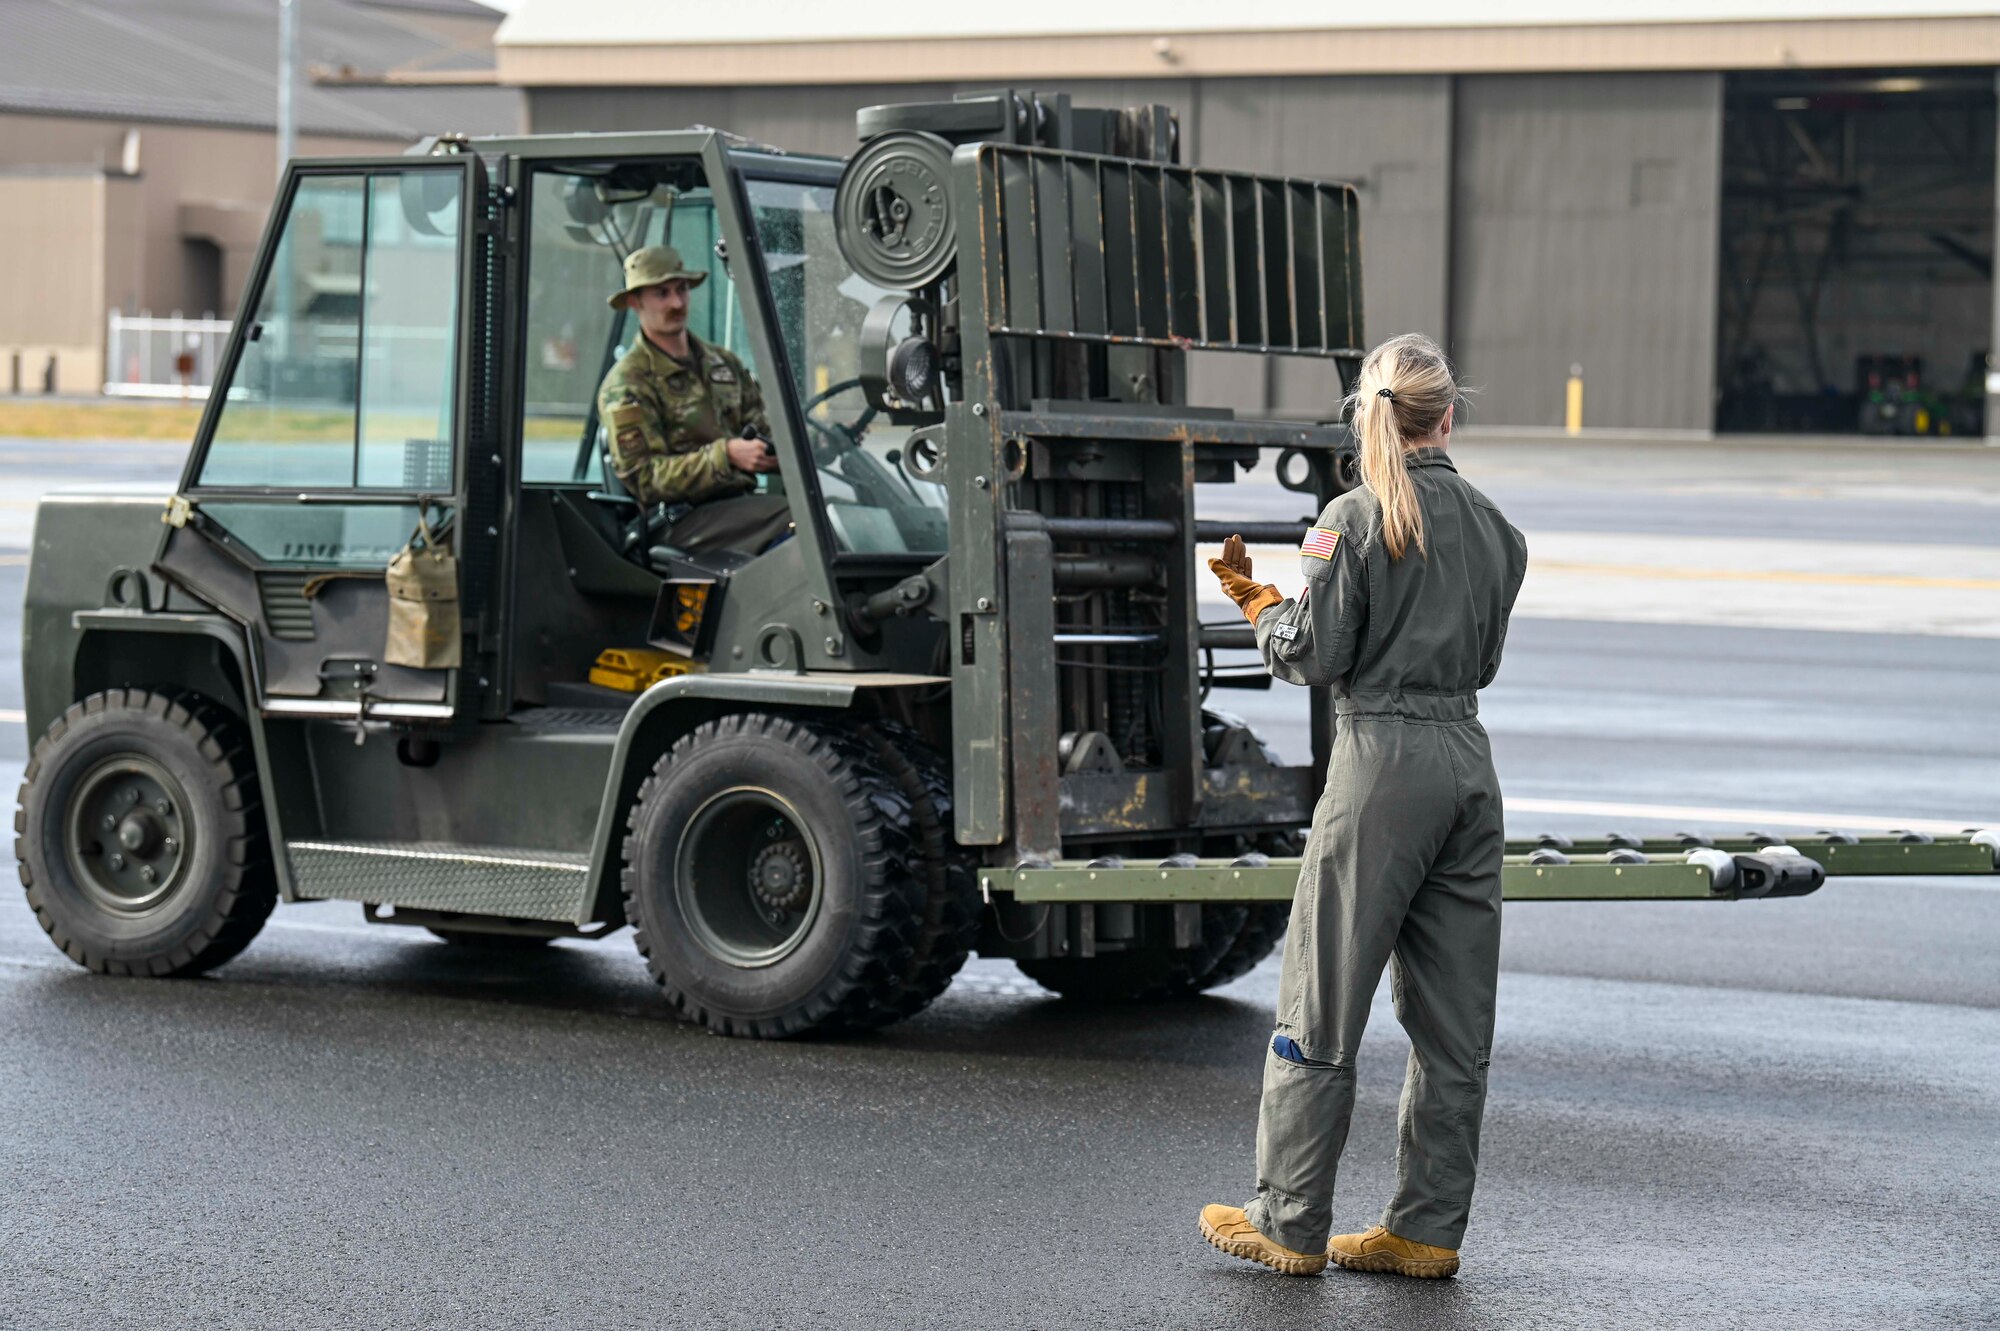 Airman 1st Class Sydnee Neal uses hand signals to guide Staff Sgt. Zach Reynolds who is driving the forklift